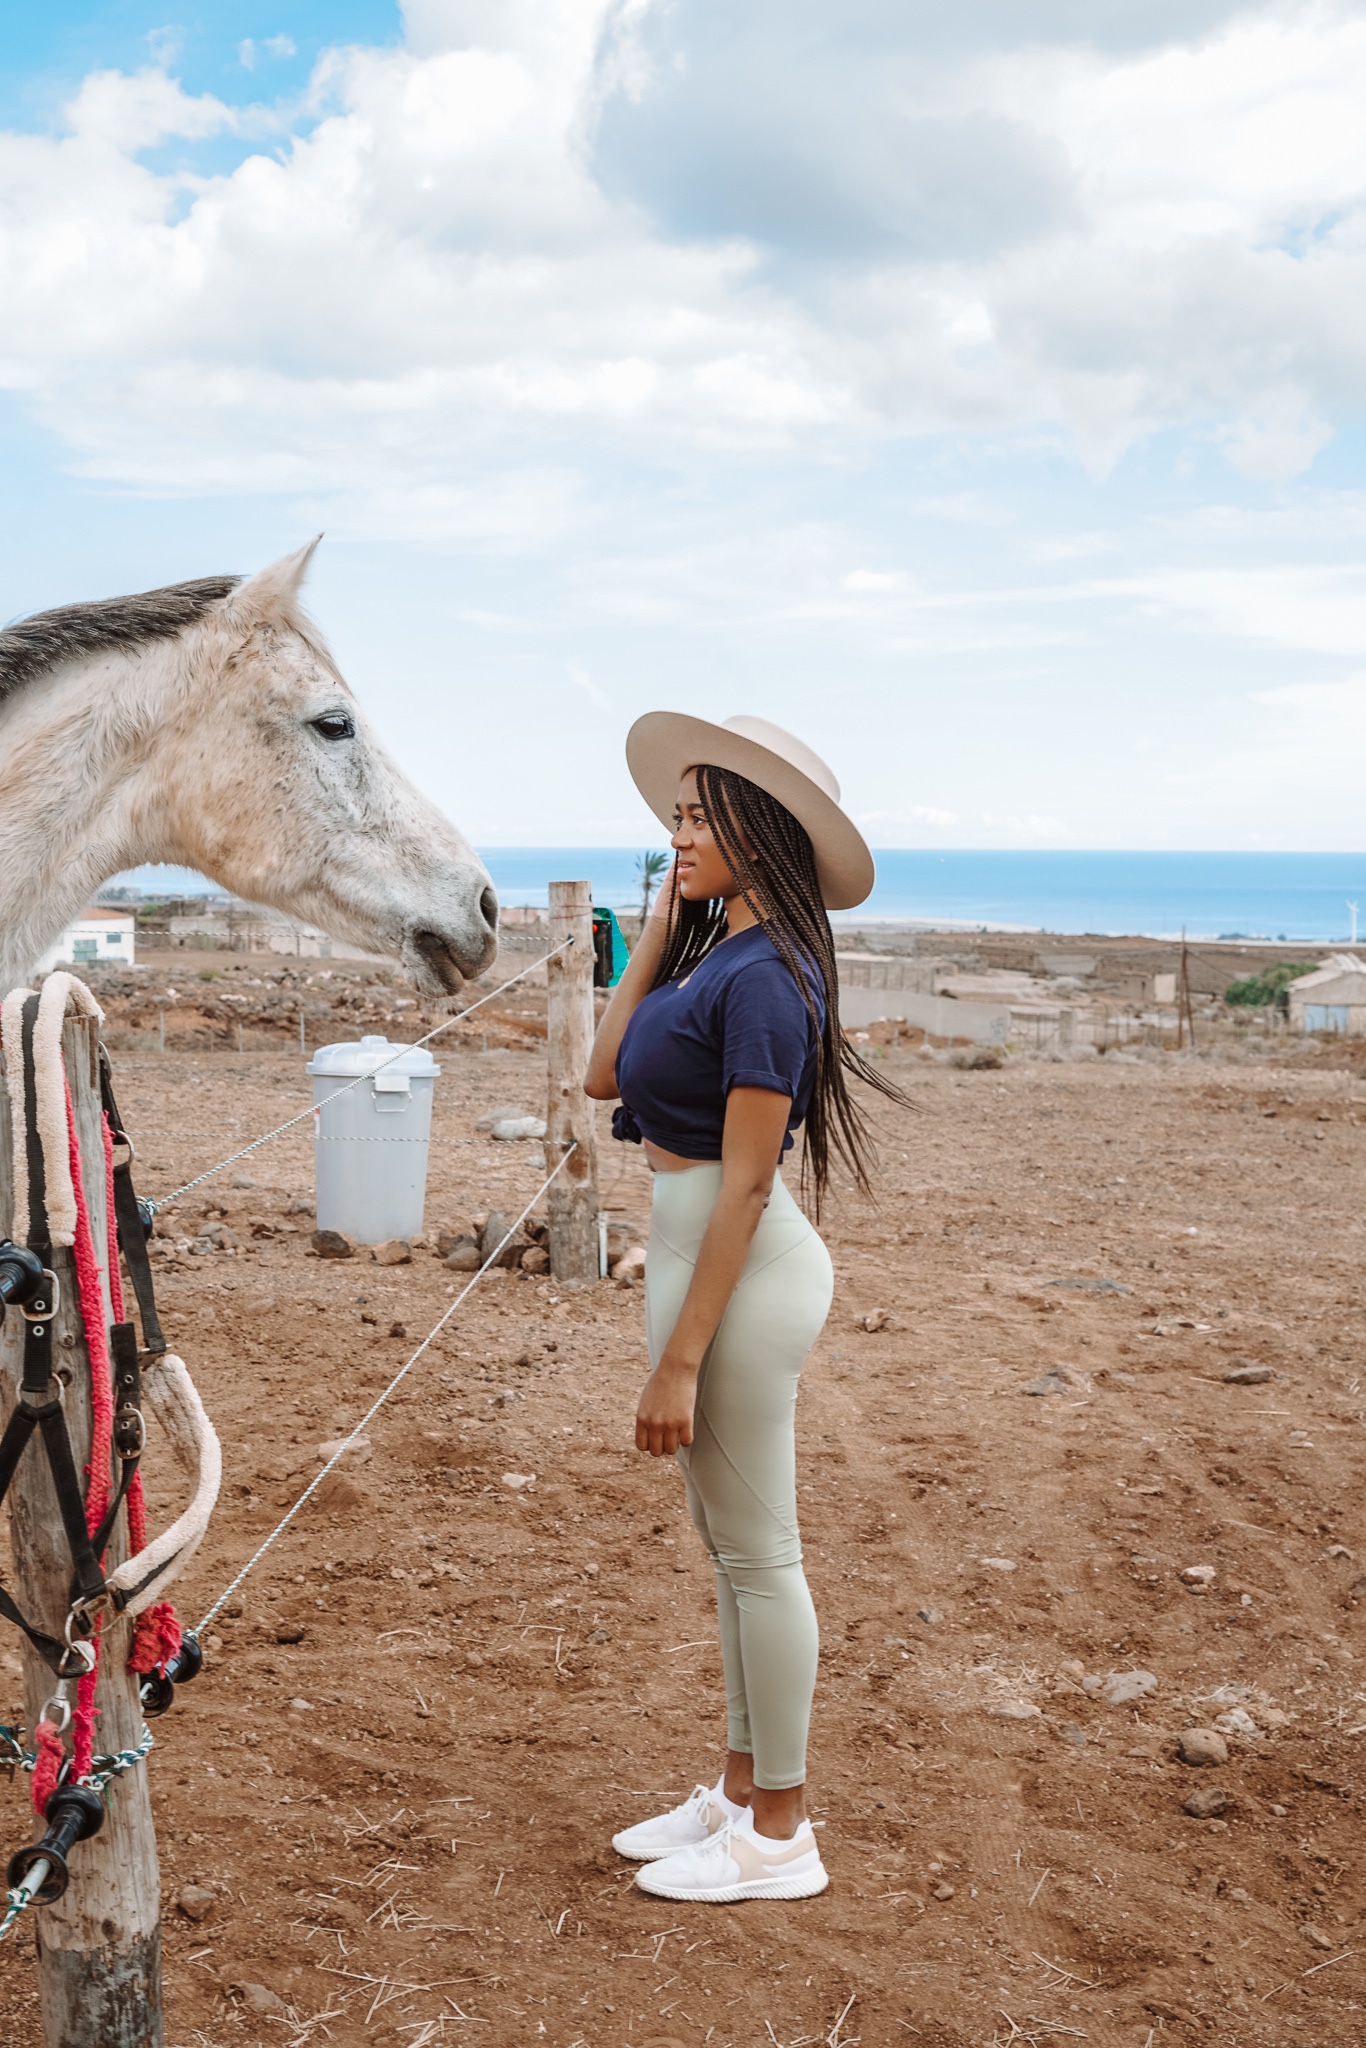 Horseback Riding in Gran Canaria unforgettable moments